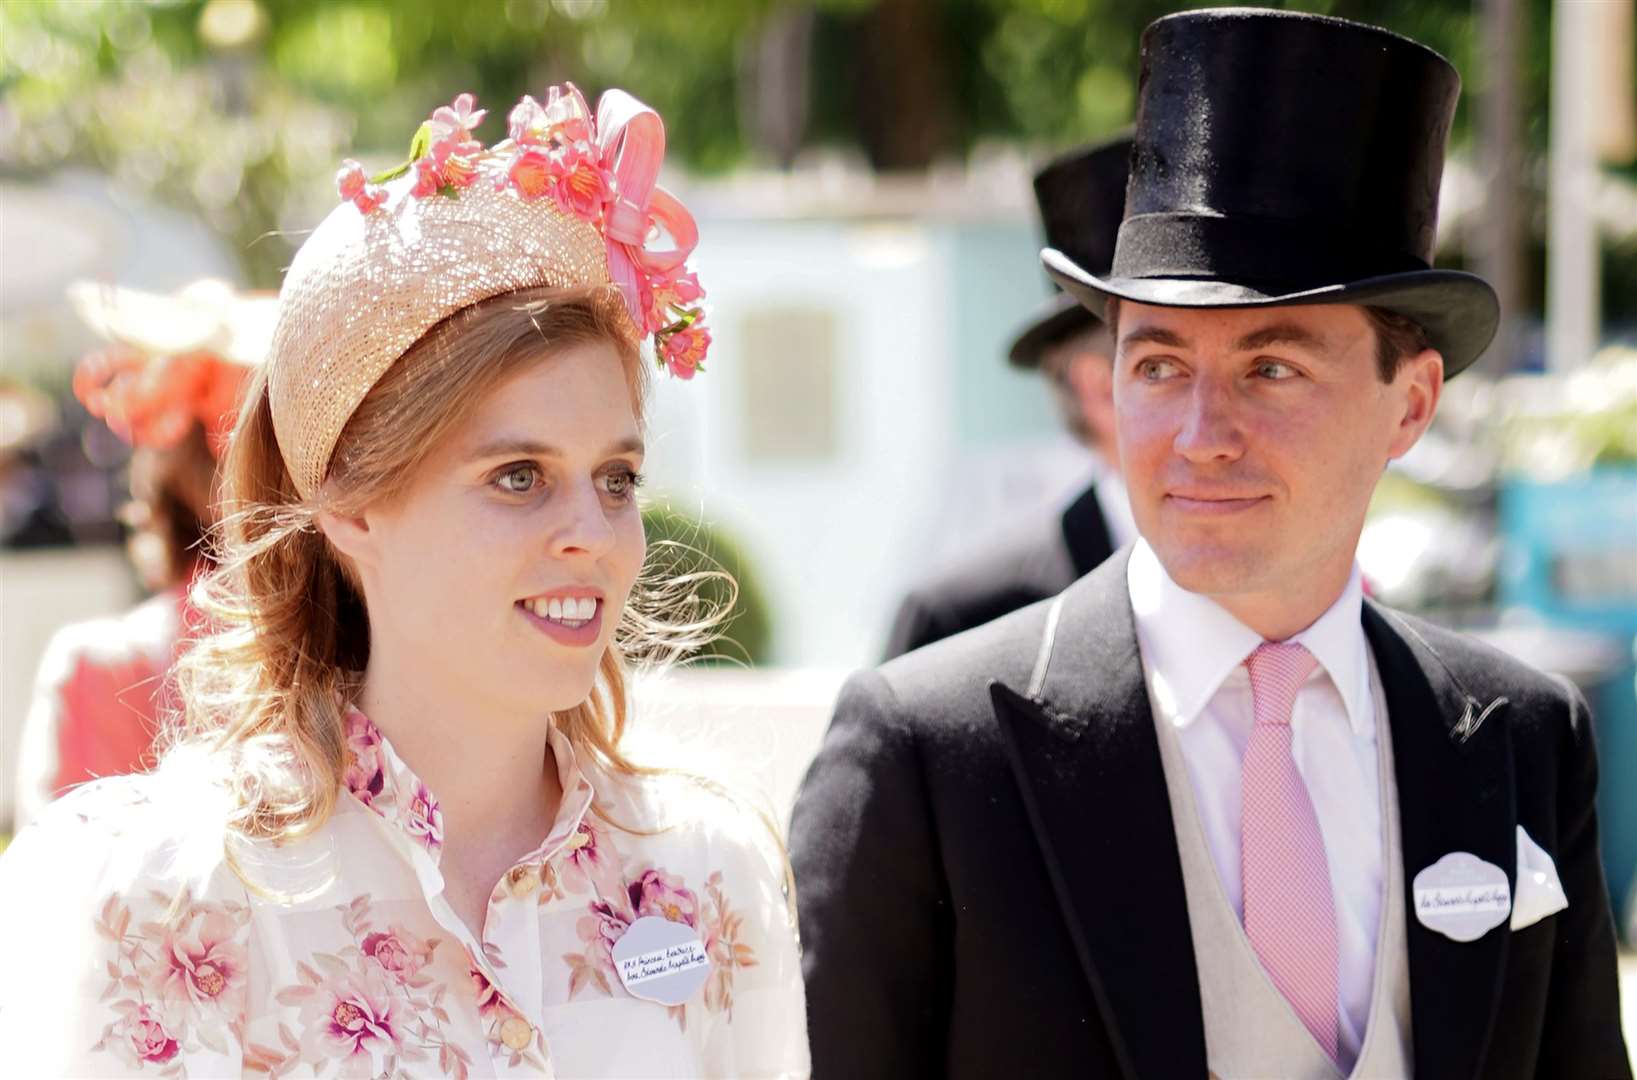 Princess Beatrice was at the races with her husband Edoardo Mapelli Mozzi (Aaron Chown/PA)